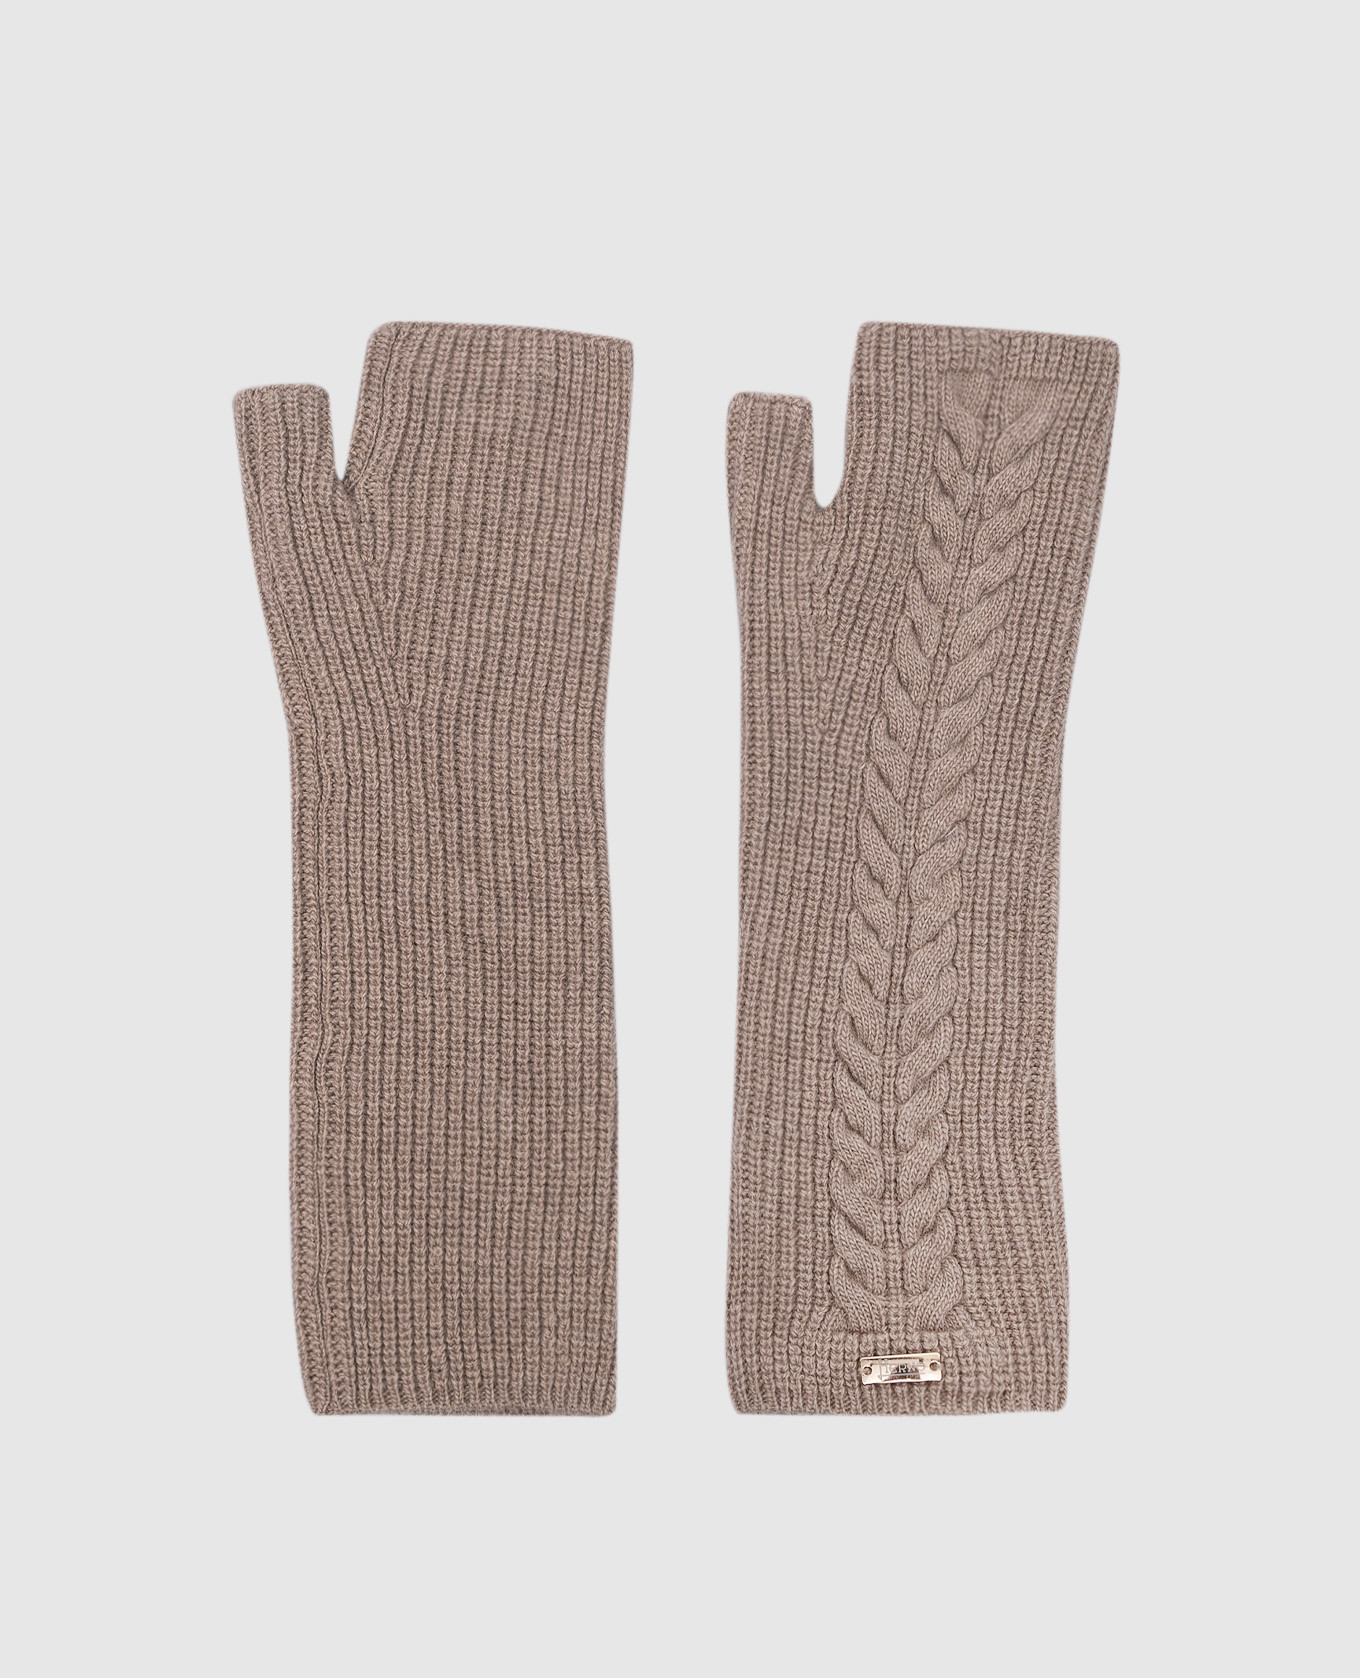 Beige mittens made of wool with a textured pattern